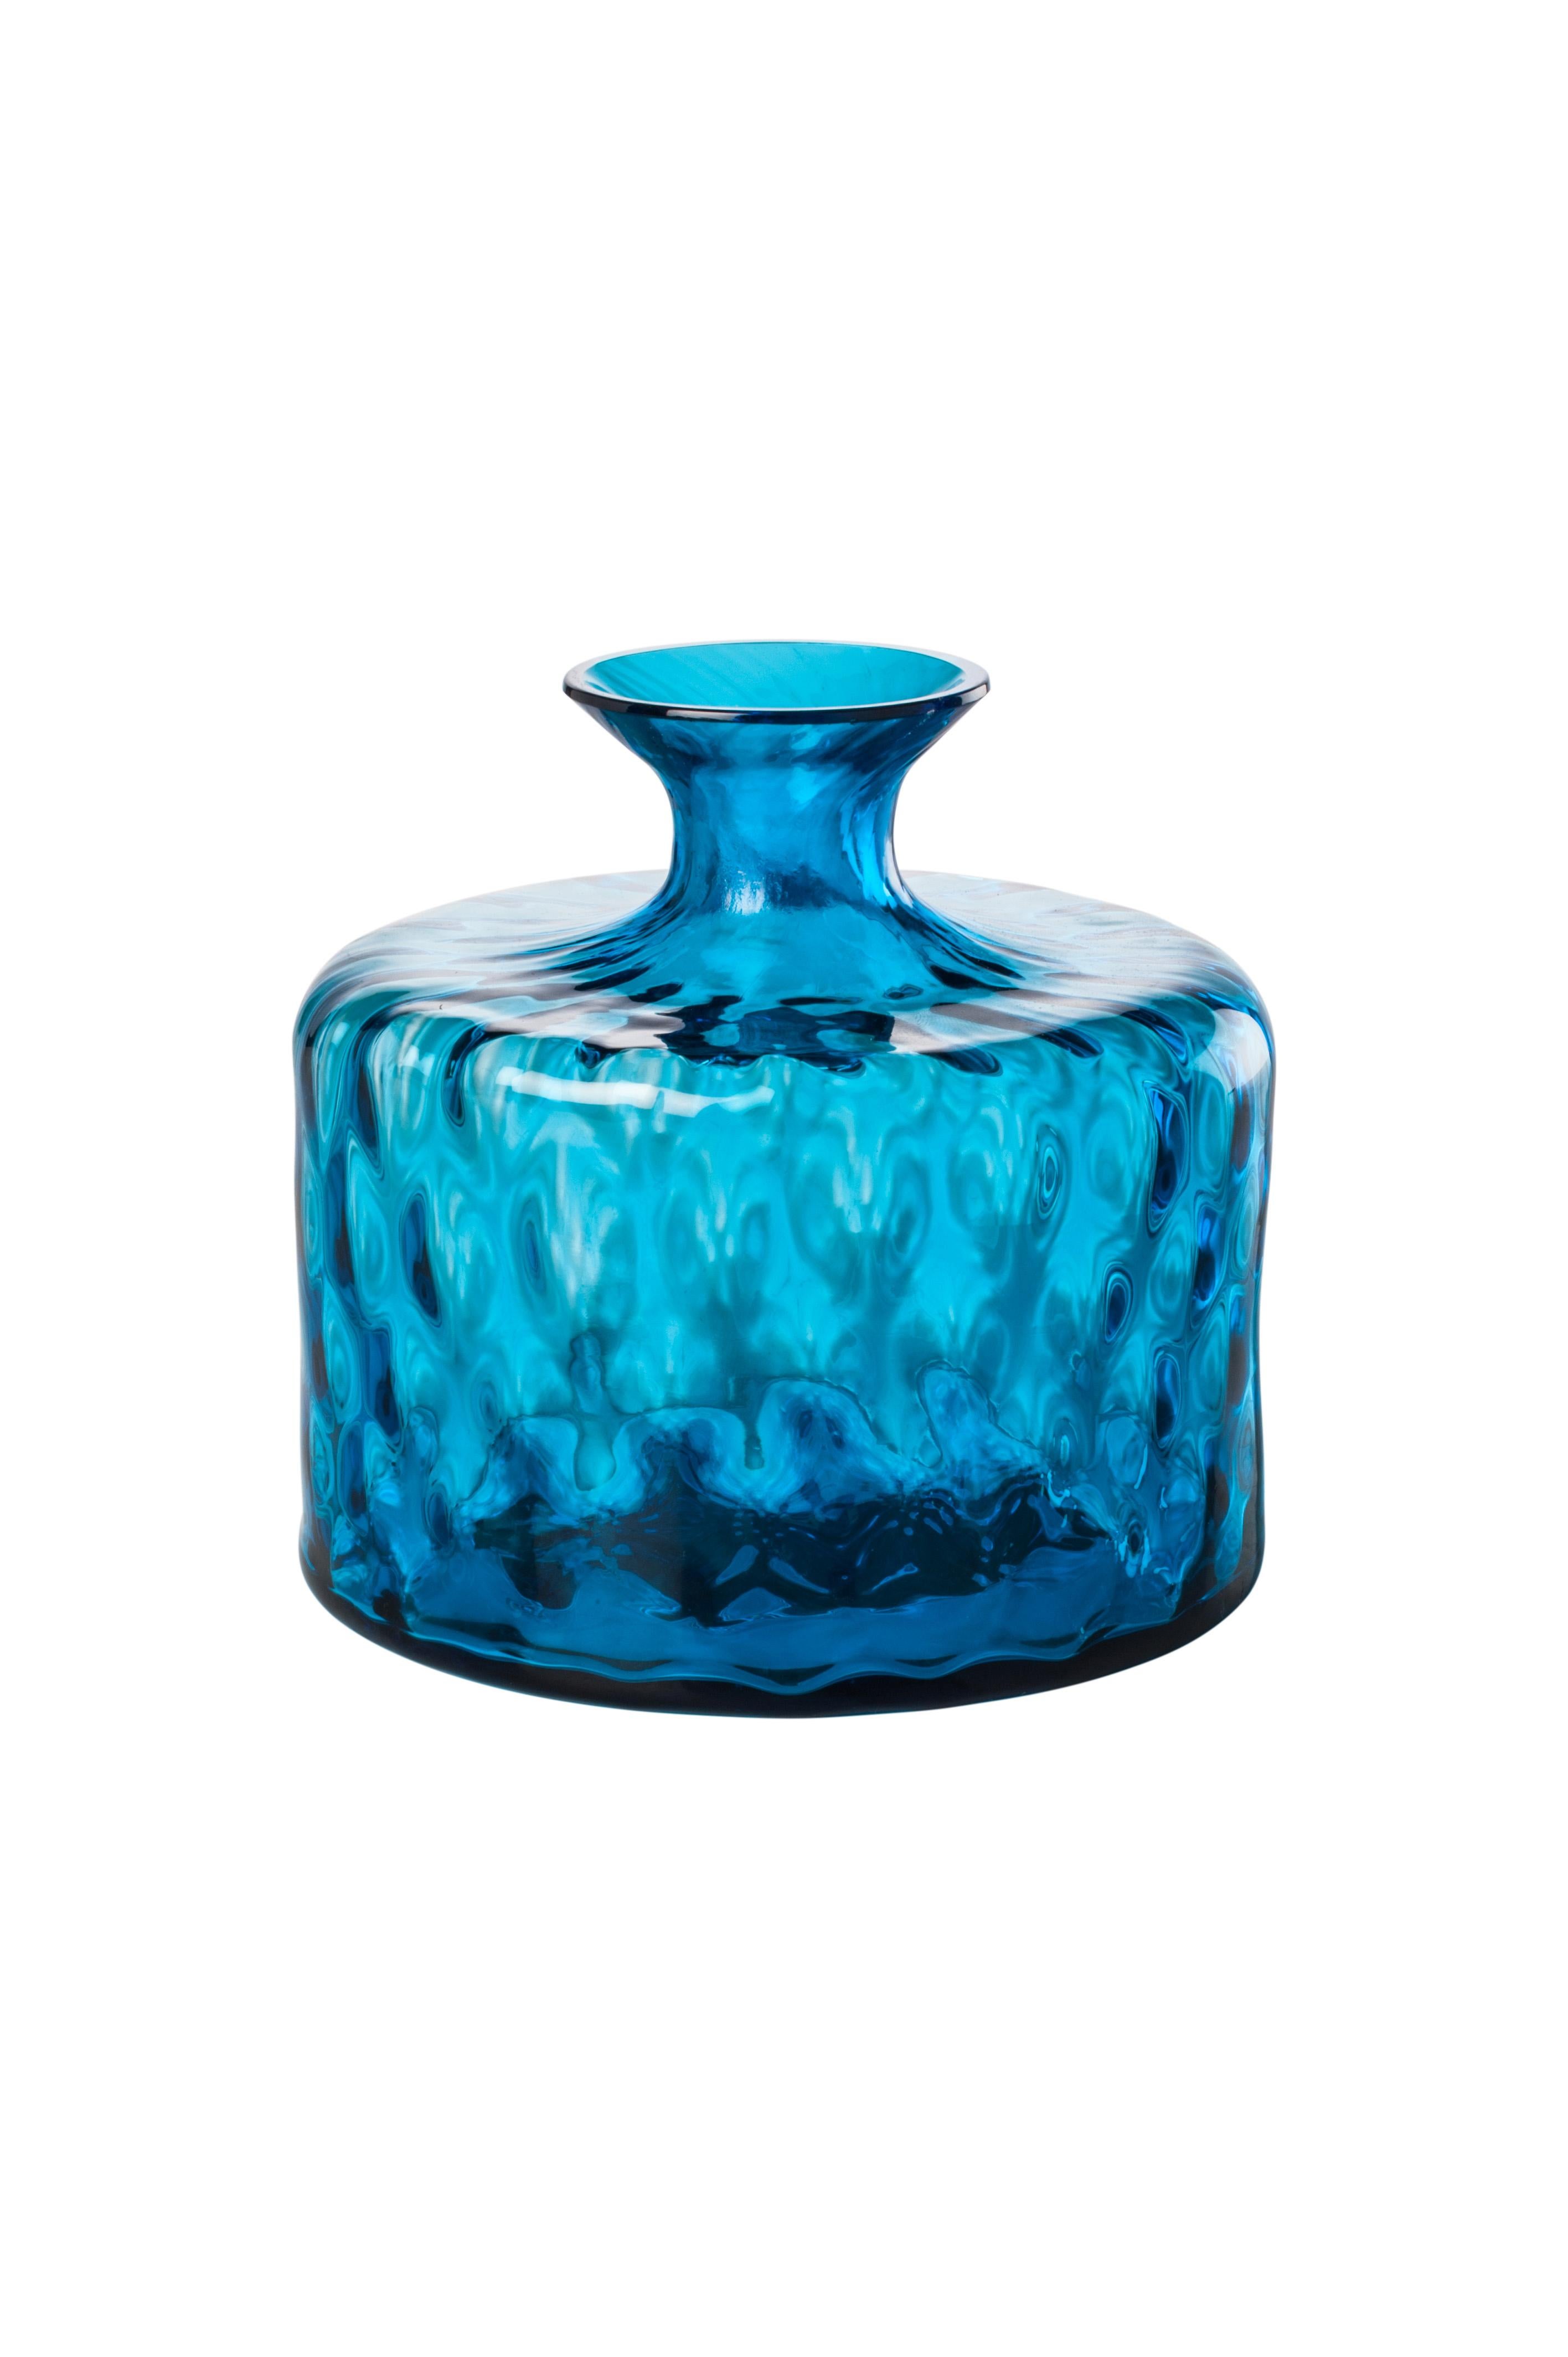 Venini glass vase with full body and thin funneled neck with textured hexagonal shaped pattern atop surface of glass in aquamarine. Featured in aquamarine colored glass and designed in 2017. Perfect for indoor home decor as container or strong